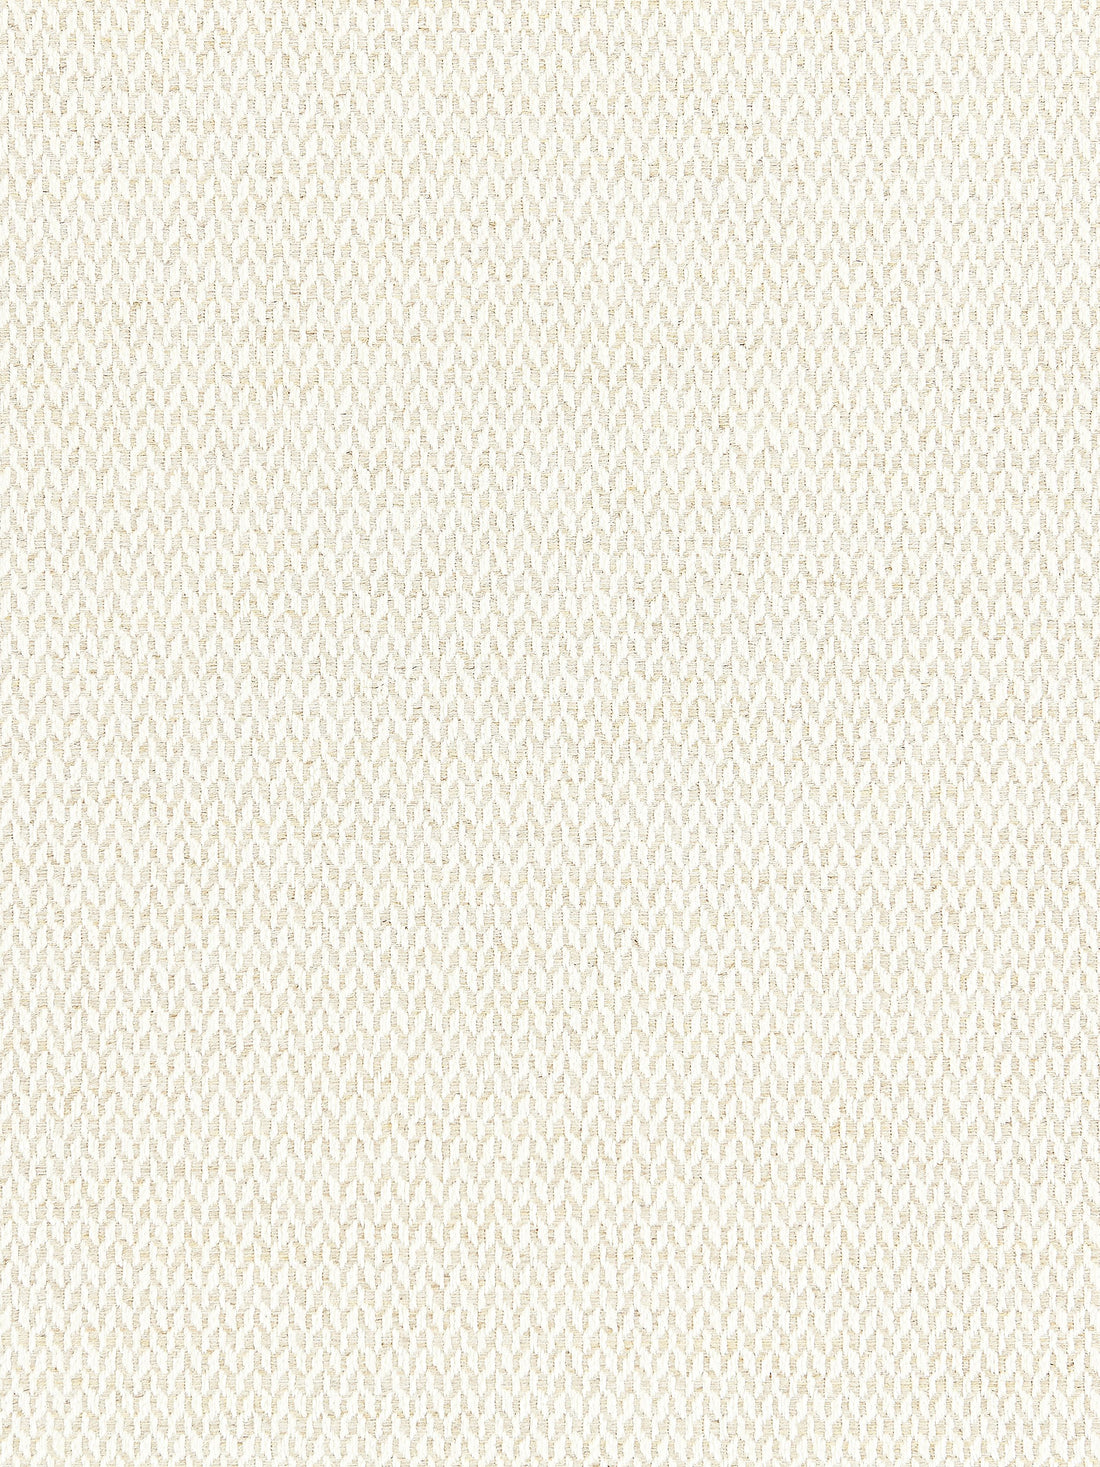 Cortona Chenille fabric in alabaster color - pattern number SC 000127104 - by Scalamandre in the Scalamandre Fabrics Book 1 collection